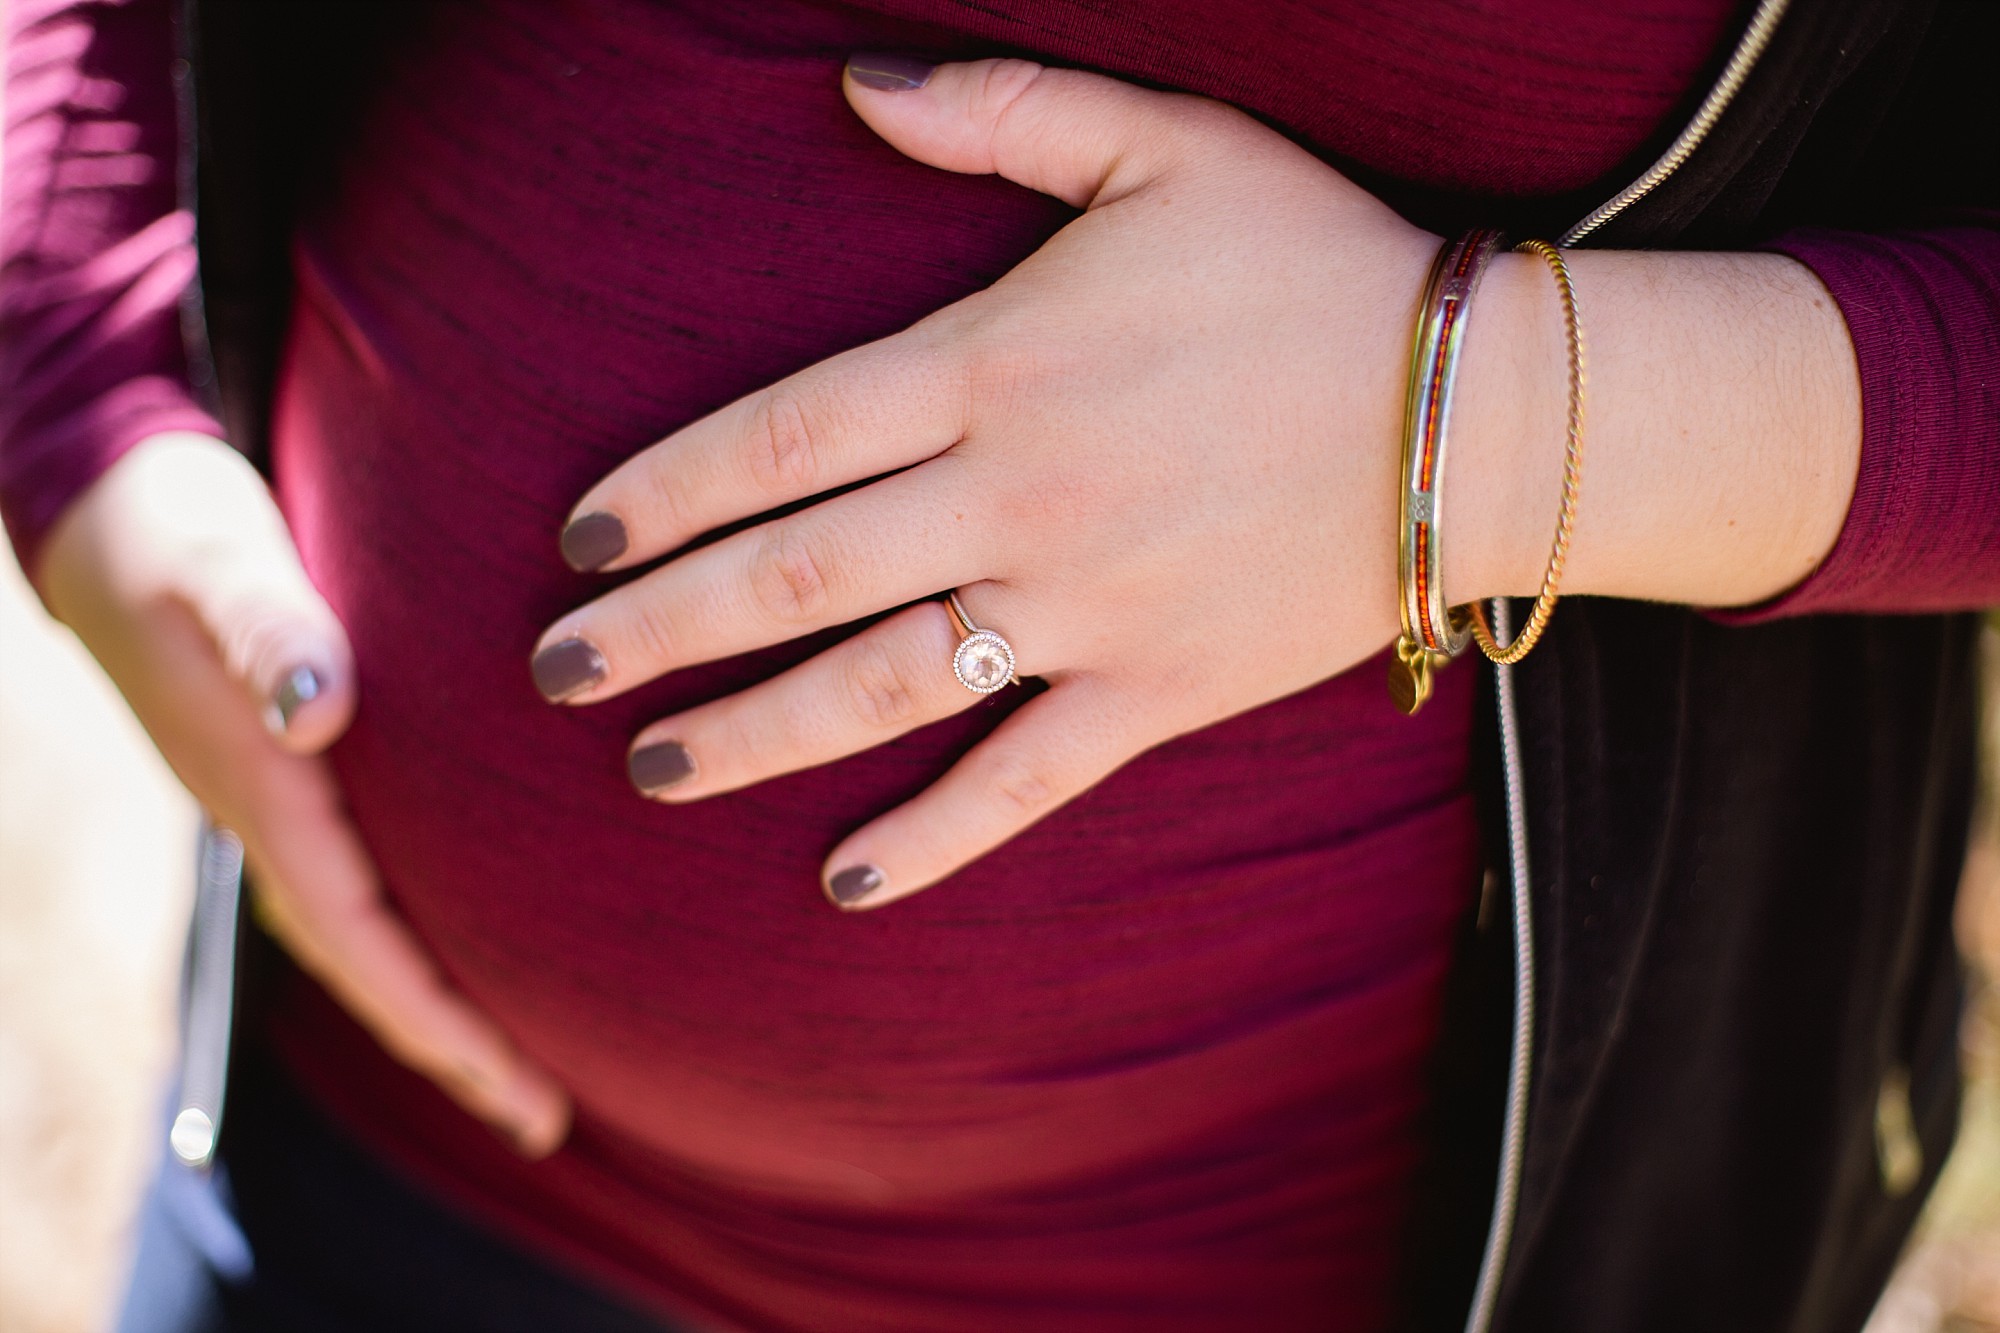 Maternity Session in West Michigan by Breanne Rochelle Photography